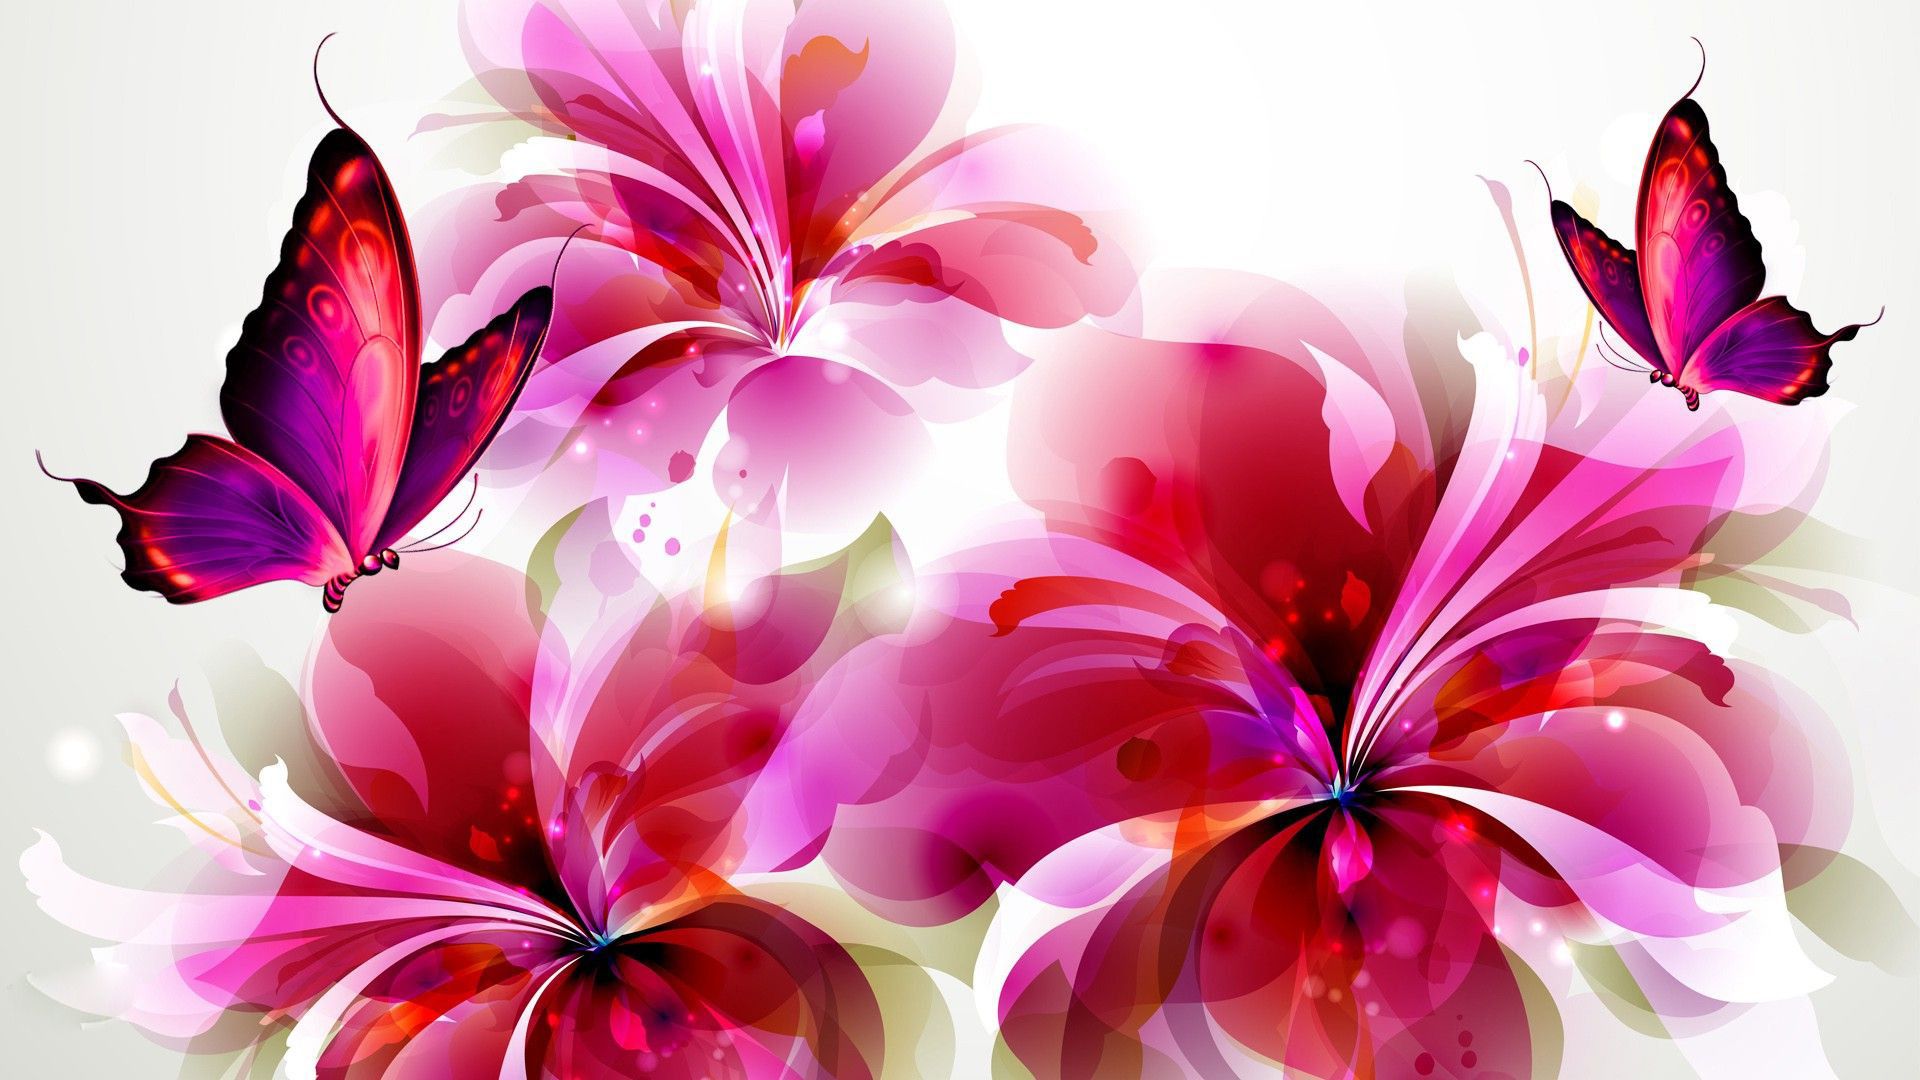 butterfly with flowers wallpapers,petal,pink,frangipani,purple,flower